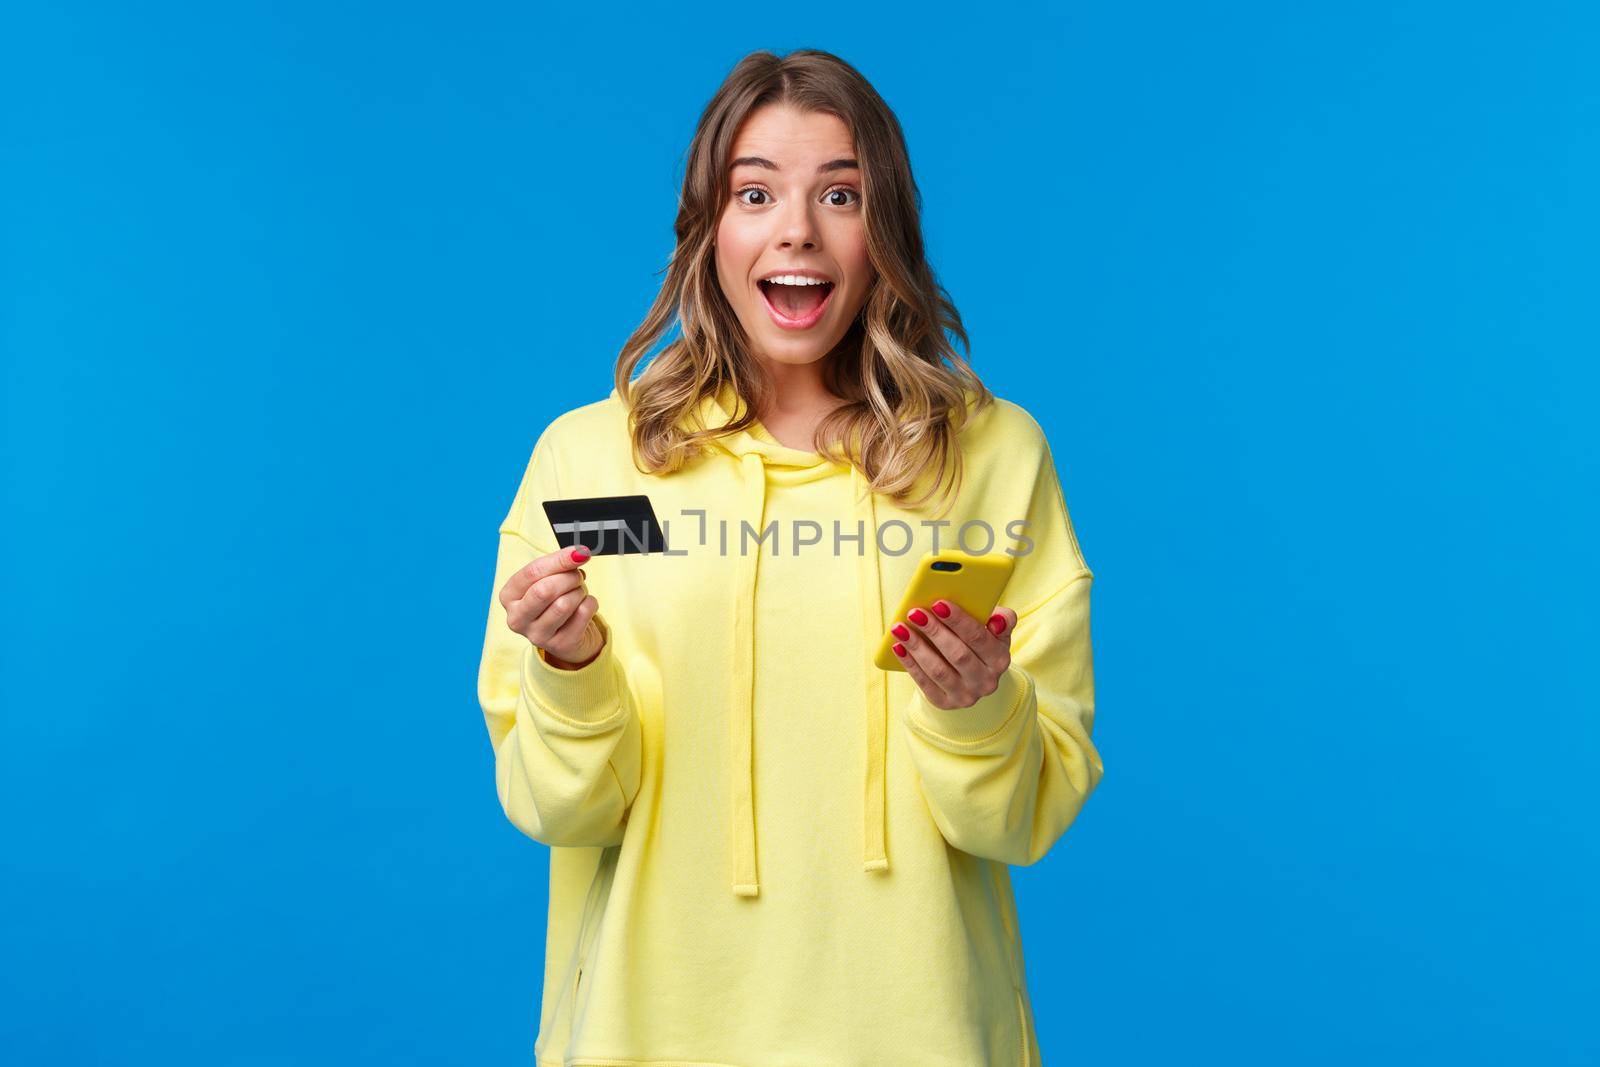 Amused and surprised cute blond girl receive cool cashback or banking offer after using new credit card with special student offer, holding mobile phone and smiling camera.